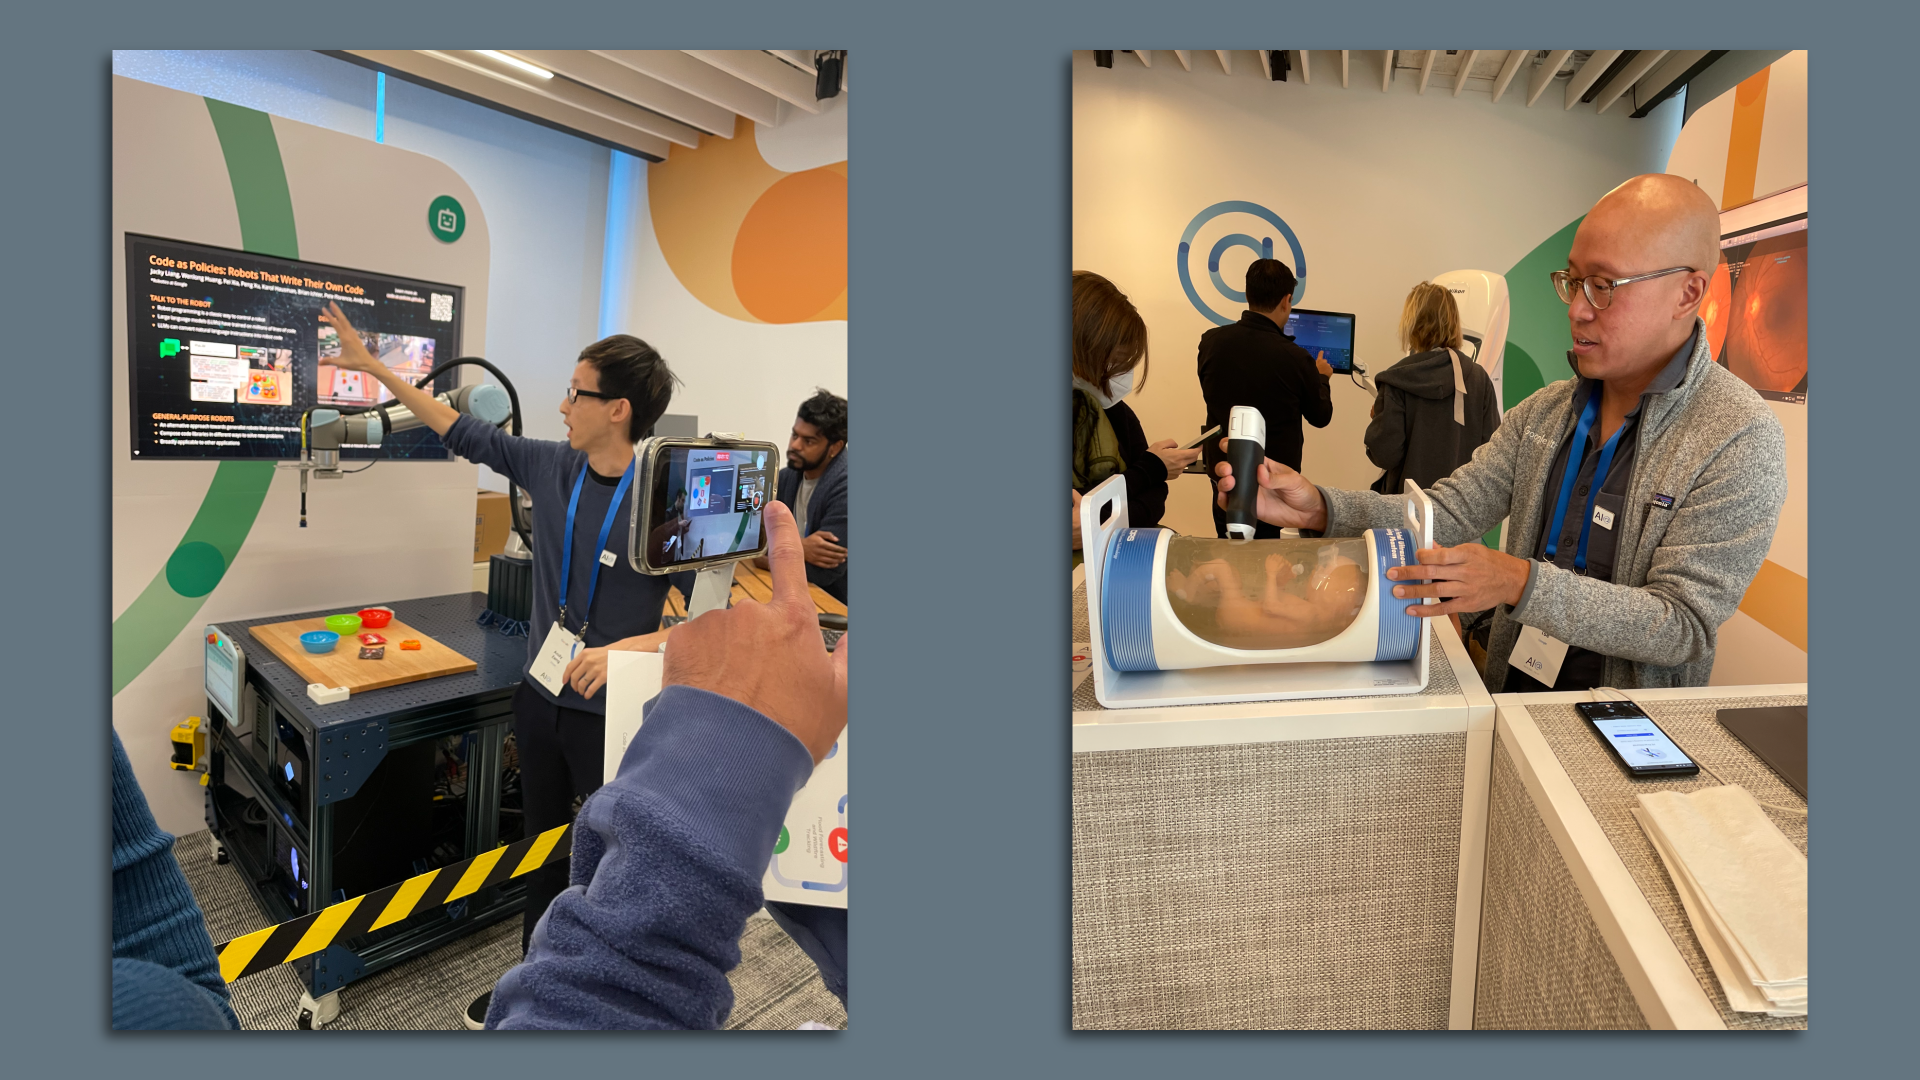 Demonstrations at Google Research's artificial intelligence press event.